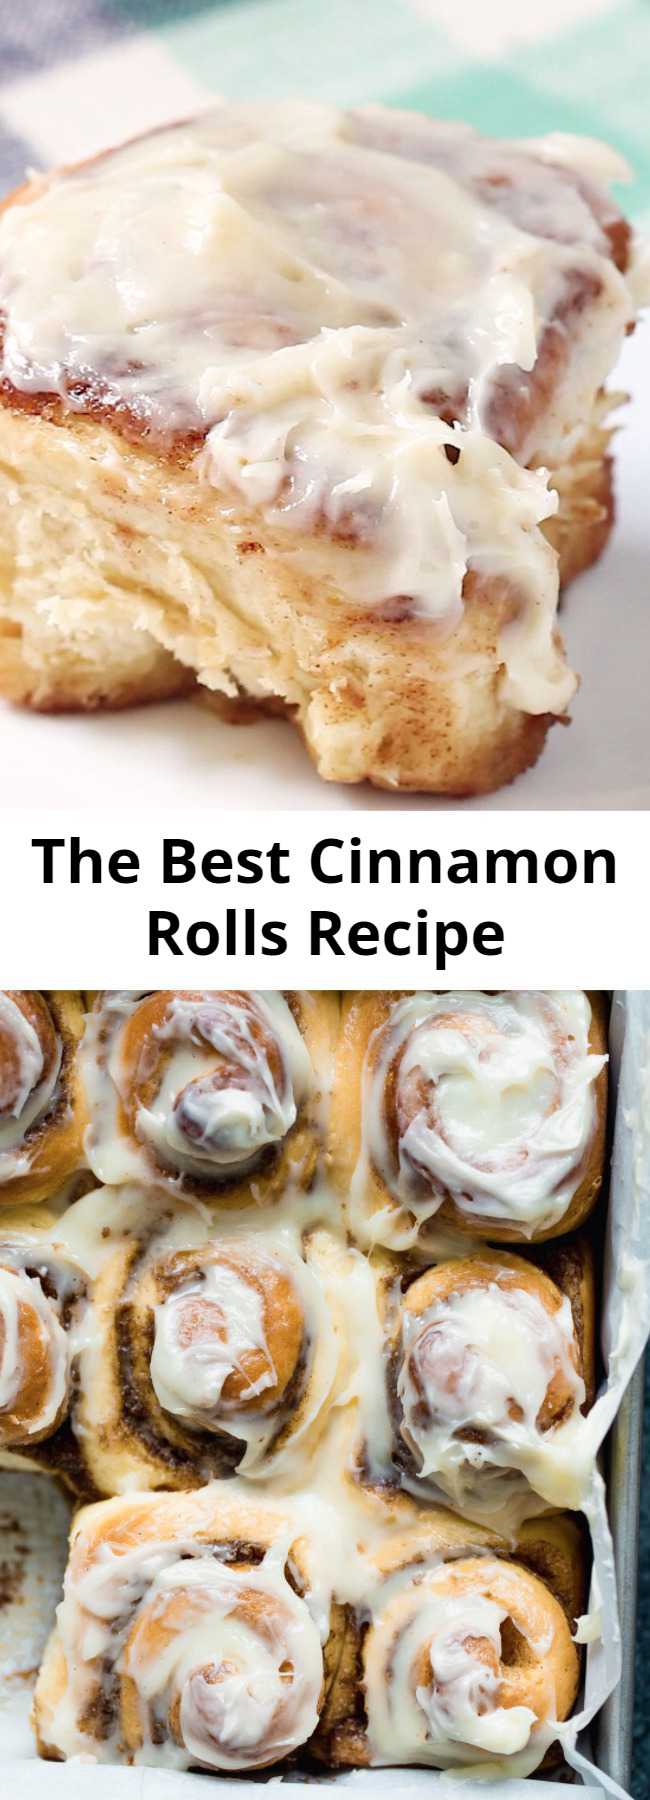 The Best Cinnamon Rolls Recipe - The BEST cinnamon rolls in the WORLD. Big, fluffy, soft and absolutely delicious. You’ll never go back to any other recipe once you try this one! This cinnamon roll recipe includes options to make them overnight or ahead of time and even freeze them.